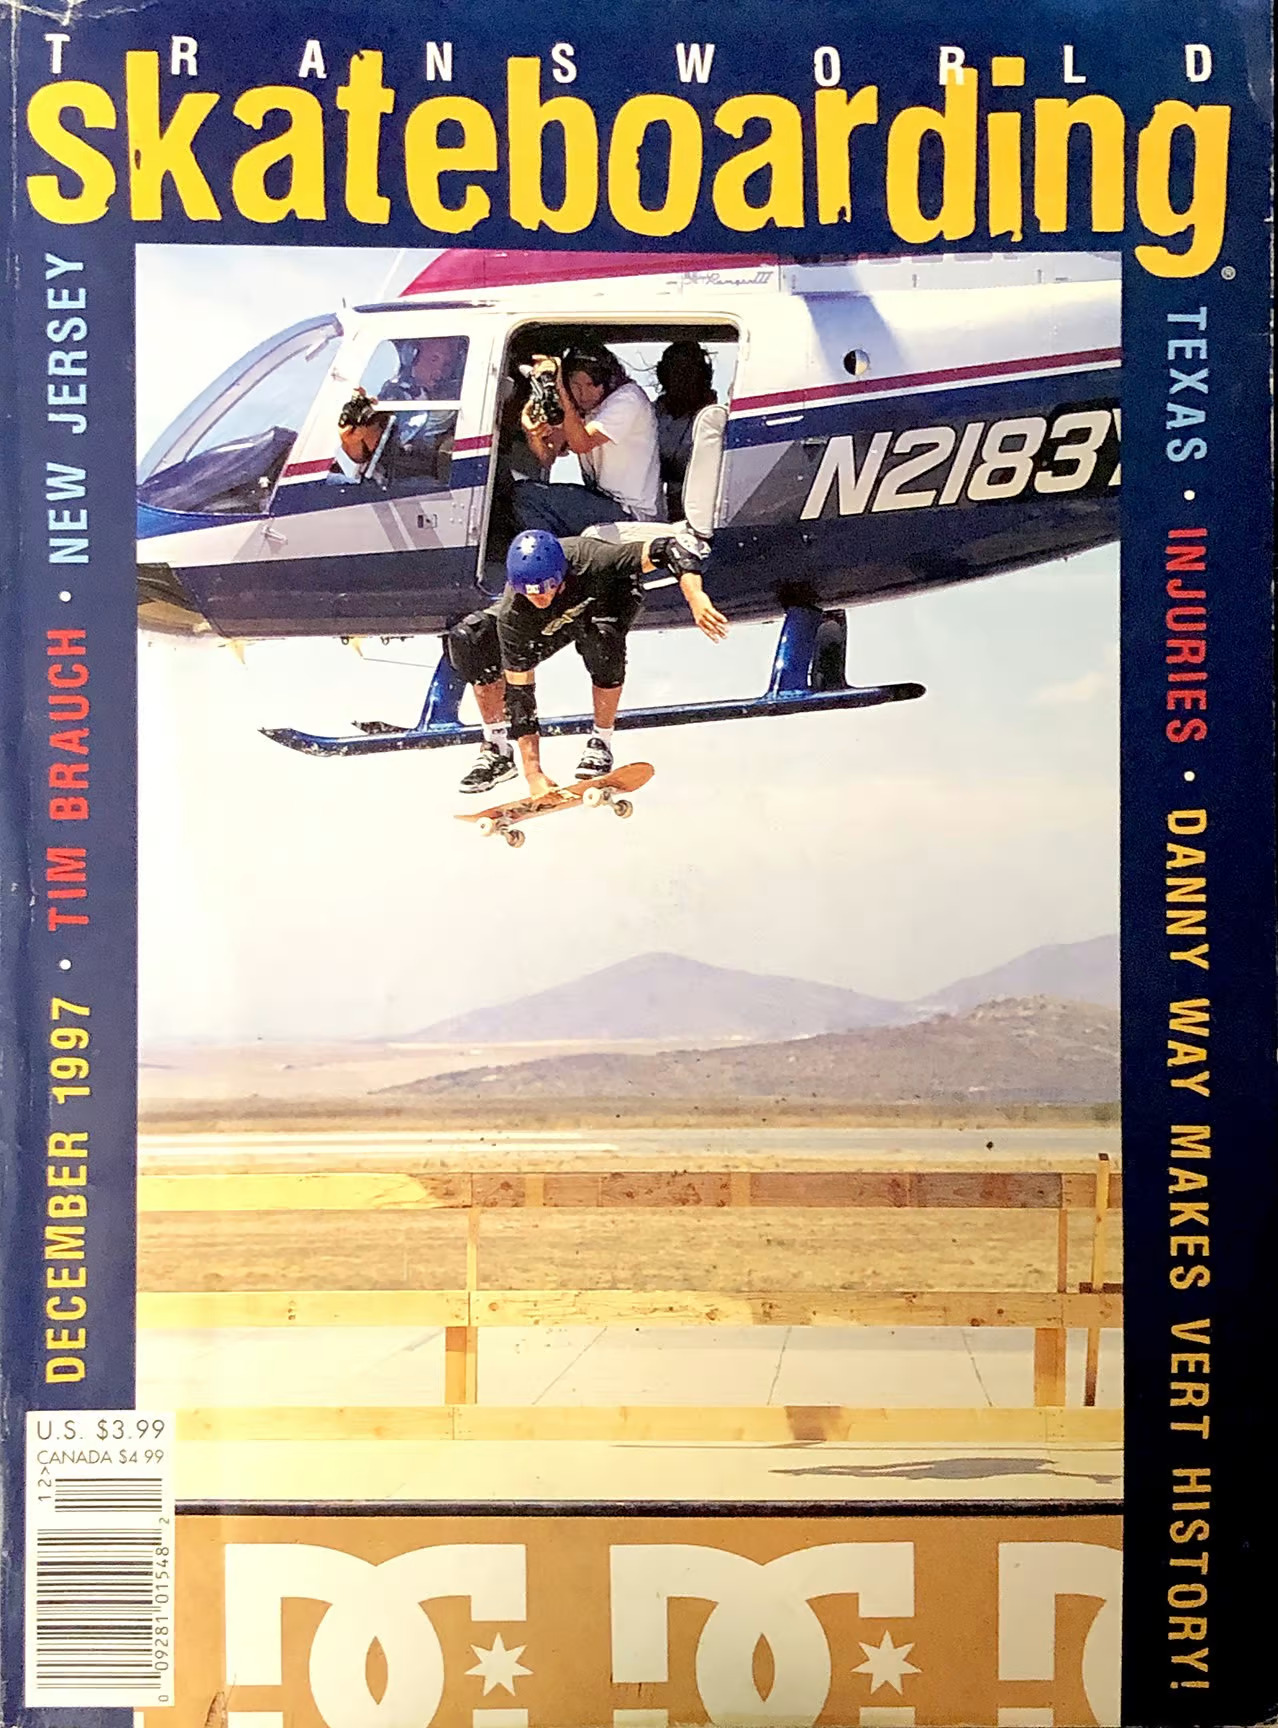 The first issue of Transworld Skateboarding I ever purchased featured Danny Way jumping out of a helicopter onto a giant half pipe. Photo credited to Dave Swift but  actually shot by Skin Phillips